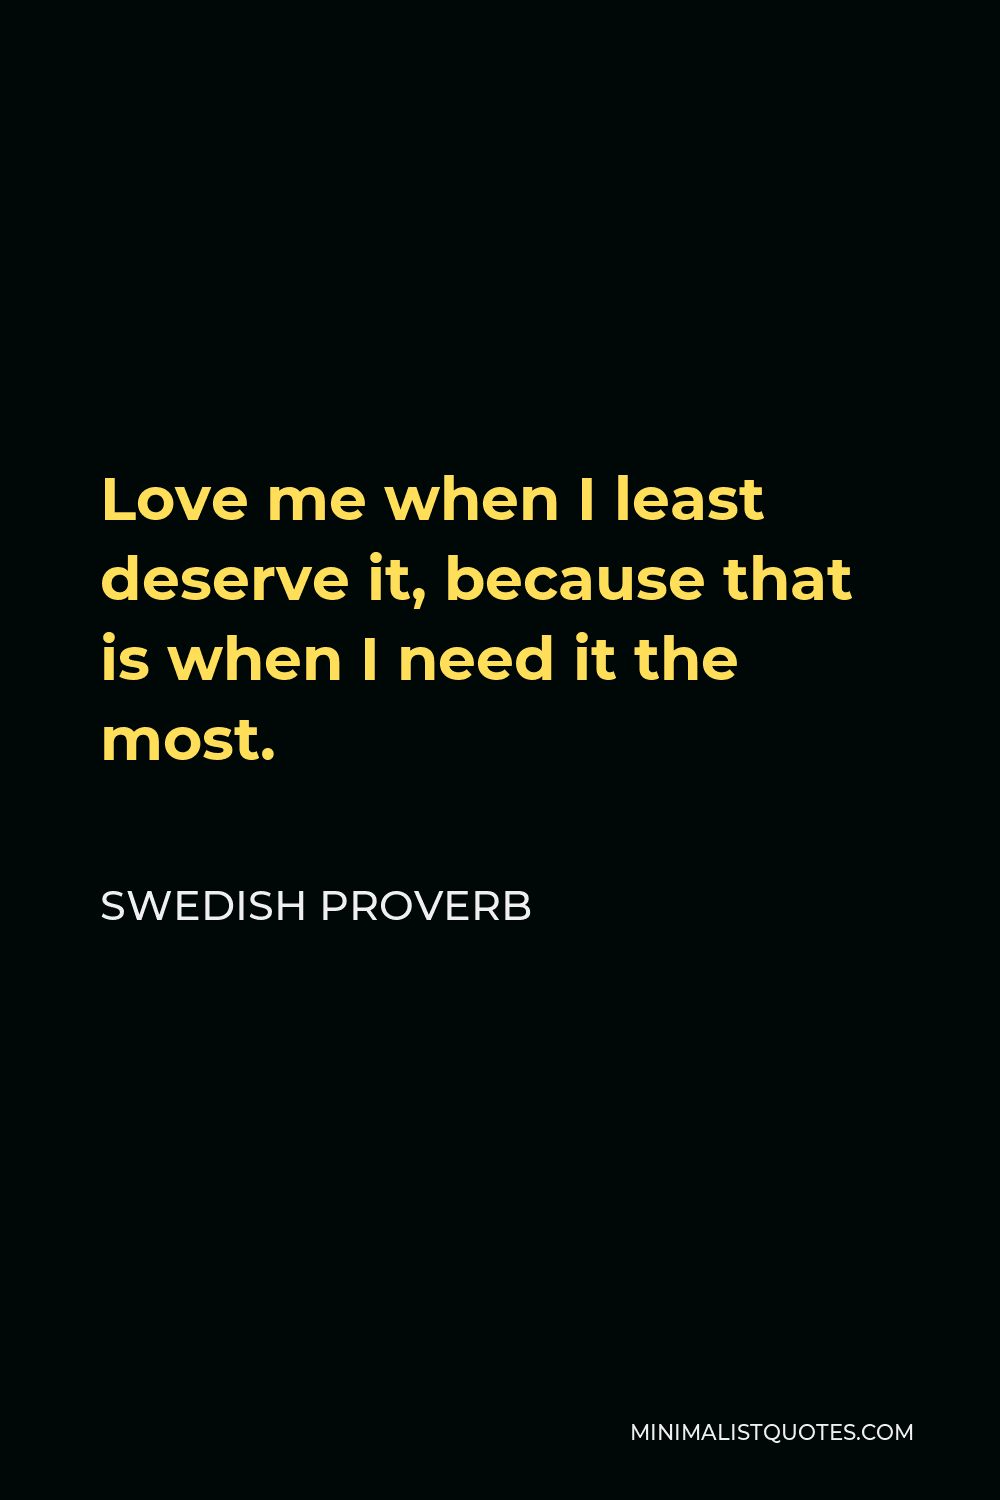 Swedish Proverb Quote - Love me when I least deserve it, because that is when I need it the most.